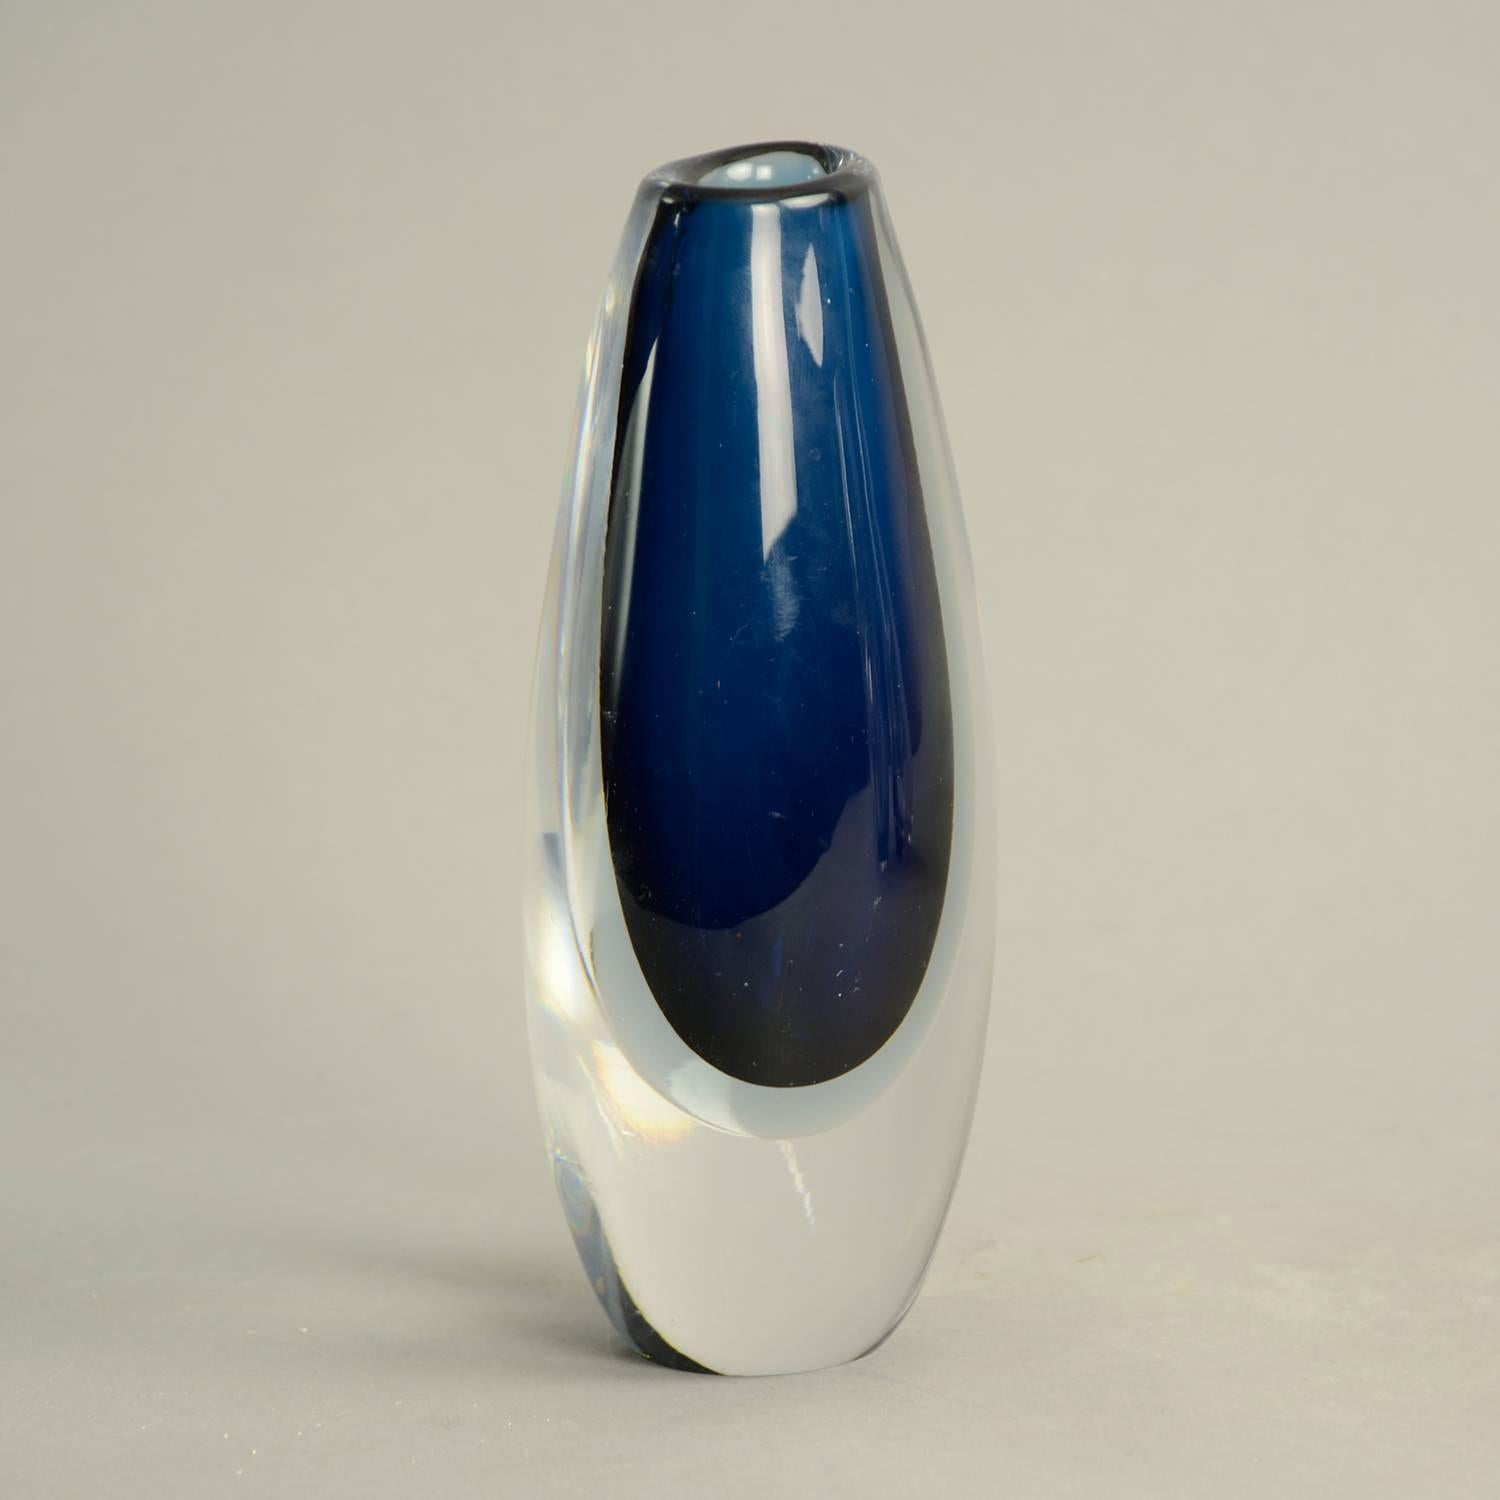 Swedish Sommerso Vase in Blue and Clear Glass, 1950s by Vicke Lindstrand for Kosta For Sale